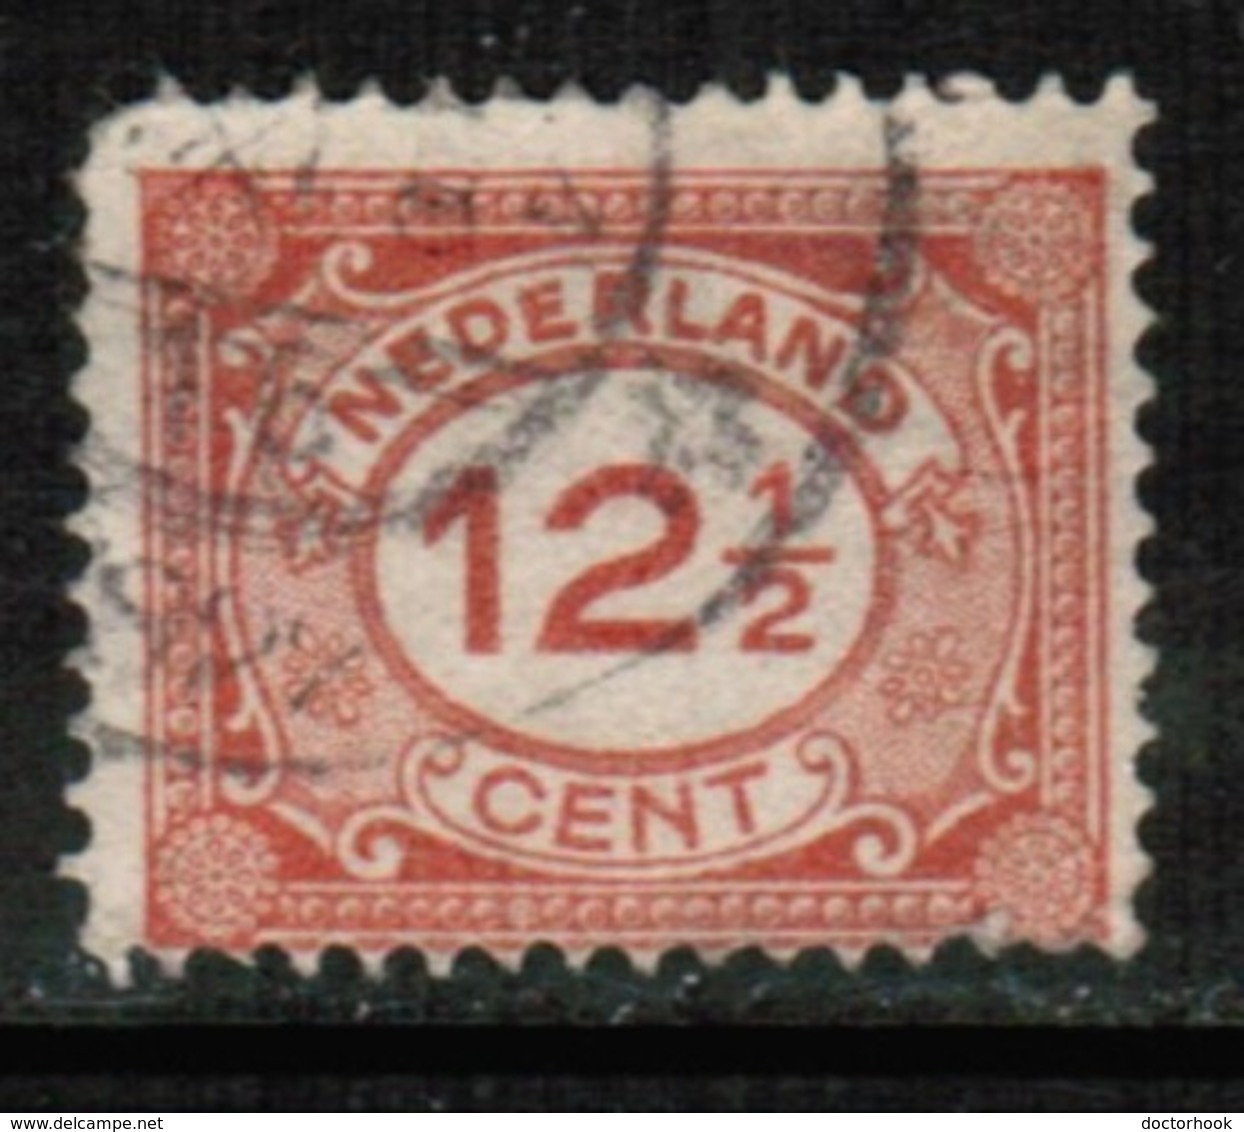 NETHERLANDS  Scott # 108 F-VF USED (Stamp Scan # 510) - Used Stamps